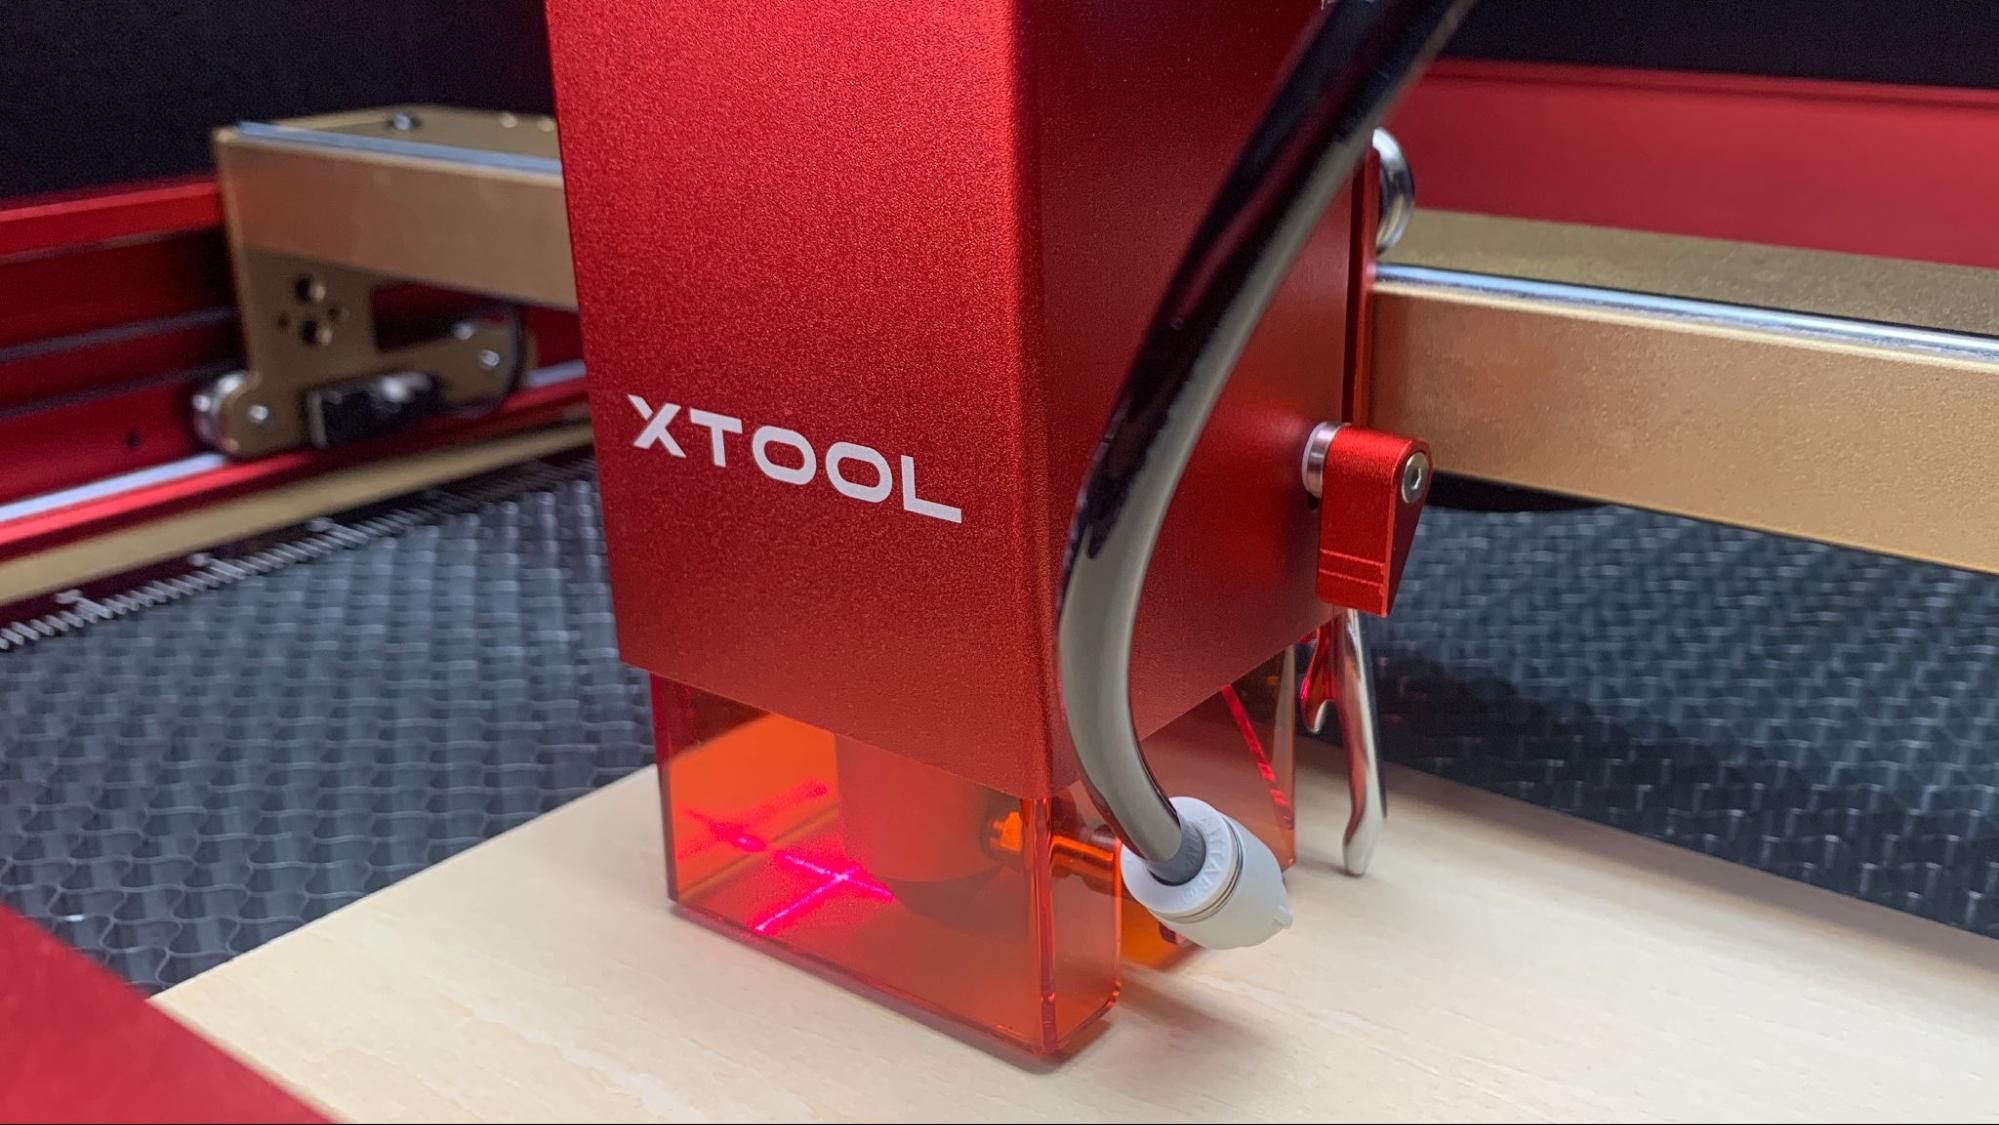 xTool D1 Pro 20W Review - Mandala Art with a 20W laser engraver